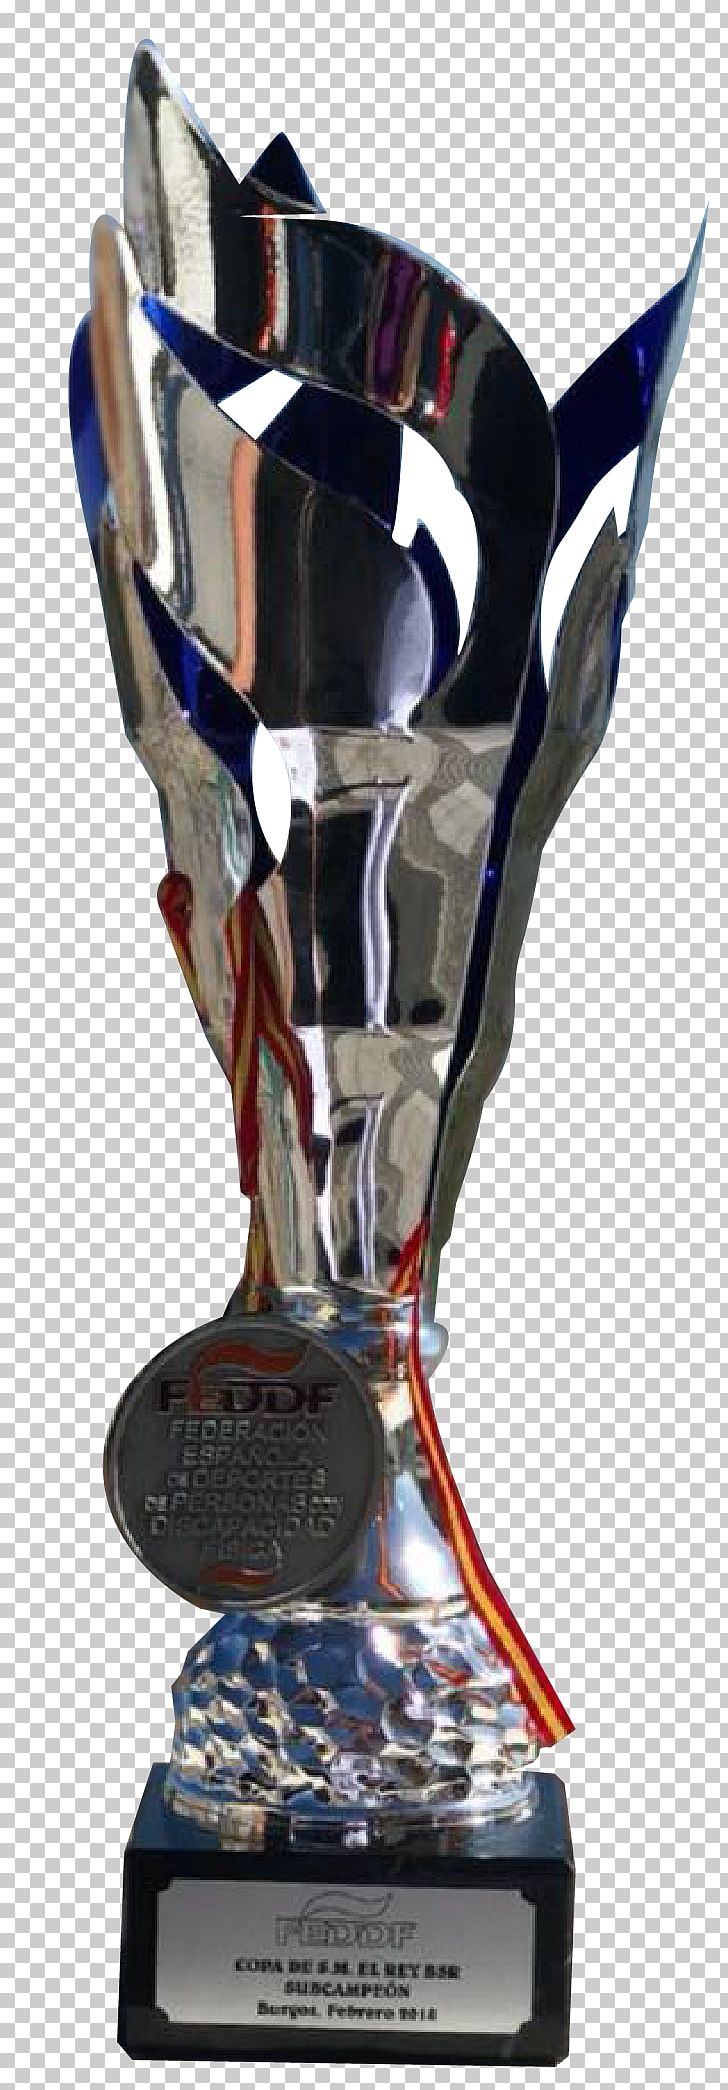 Adm Econy Copa Del Rey 1 PNG, Clipart, 1 2 3, Award, Canary Islands, Championship, Copa 2018 Free PNG Download